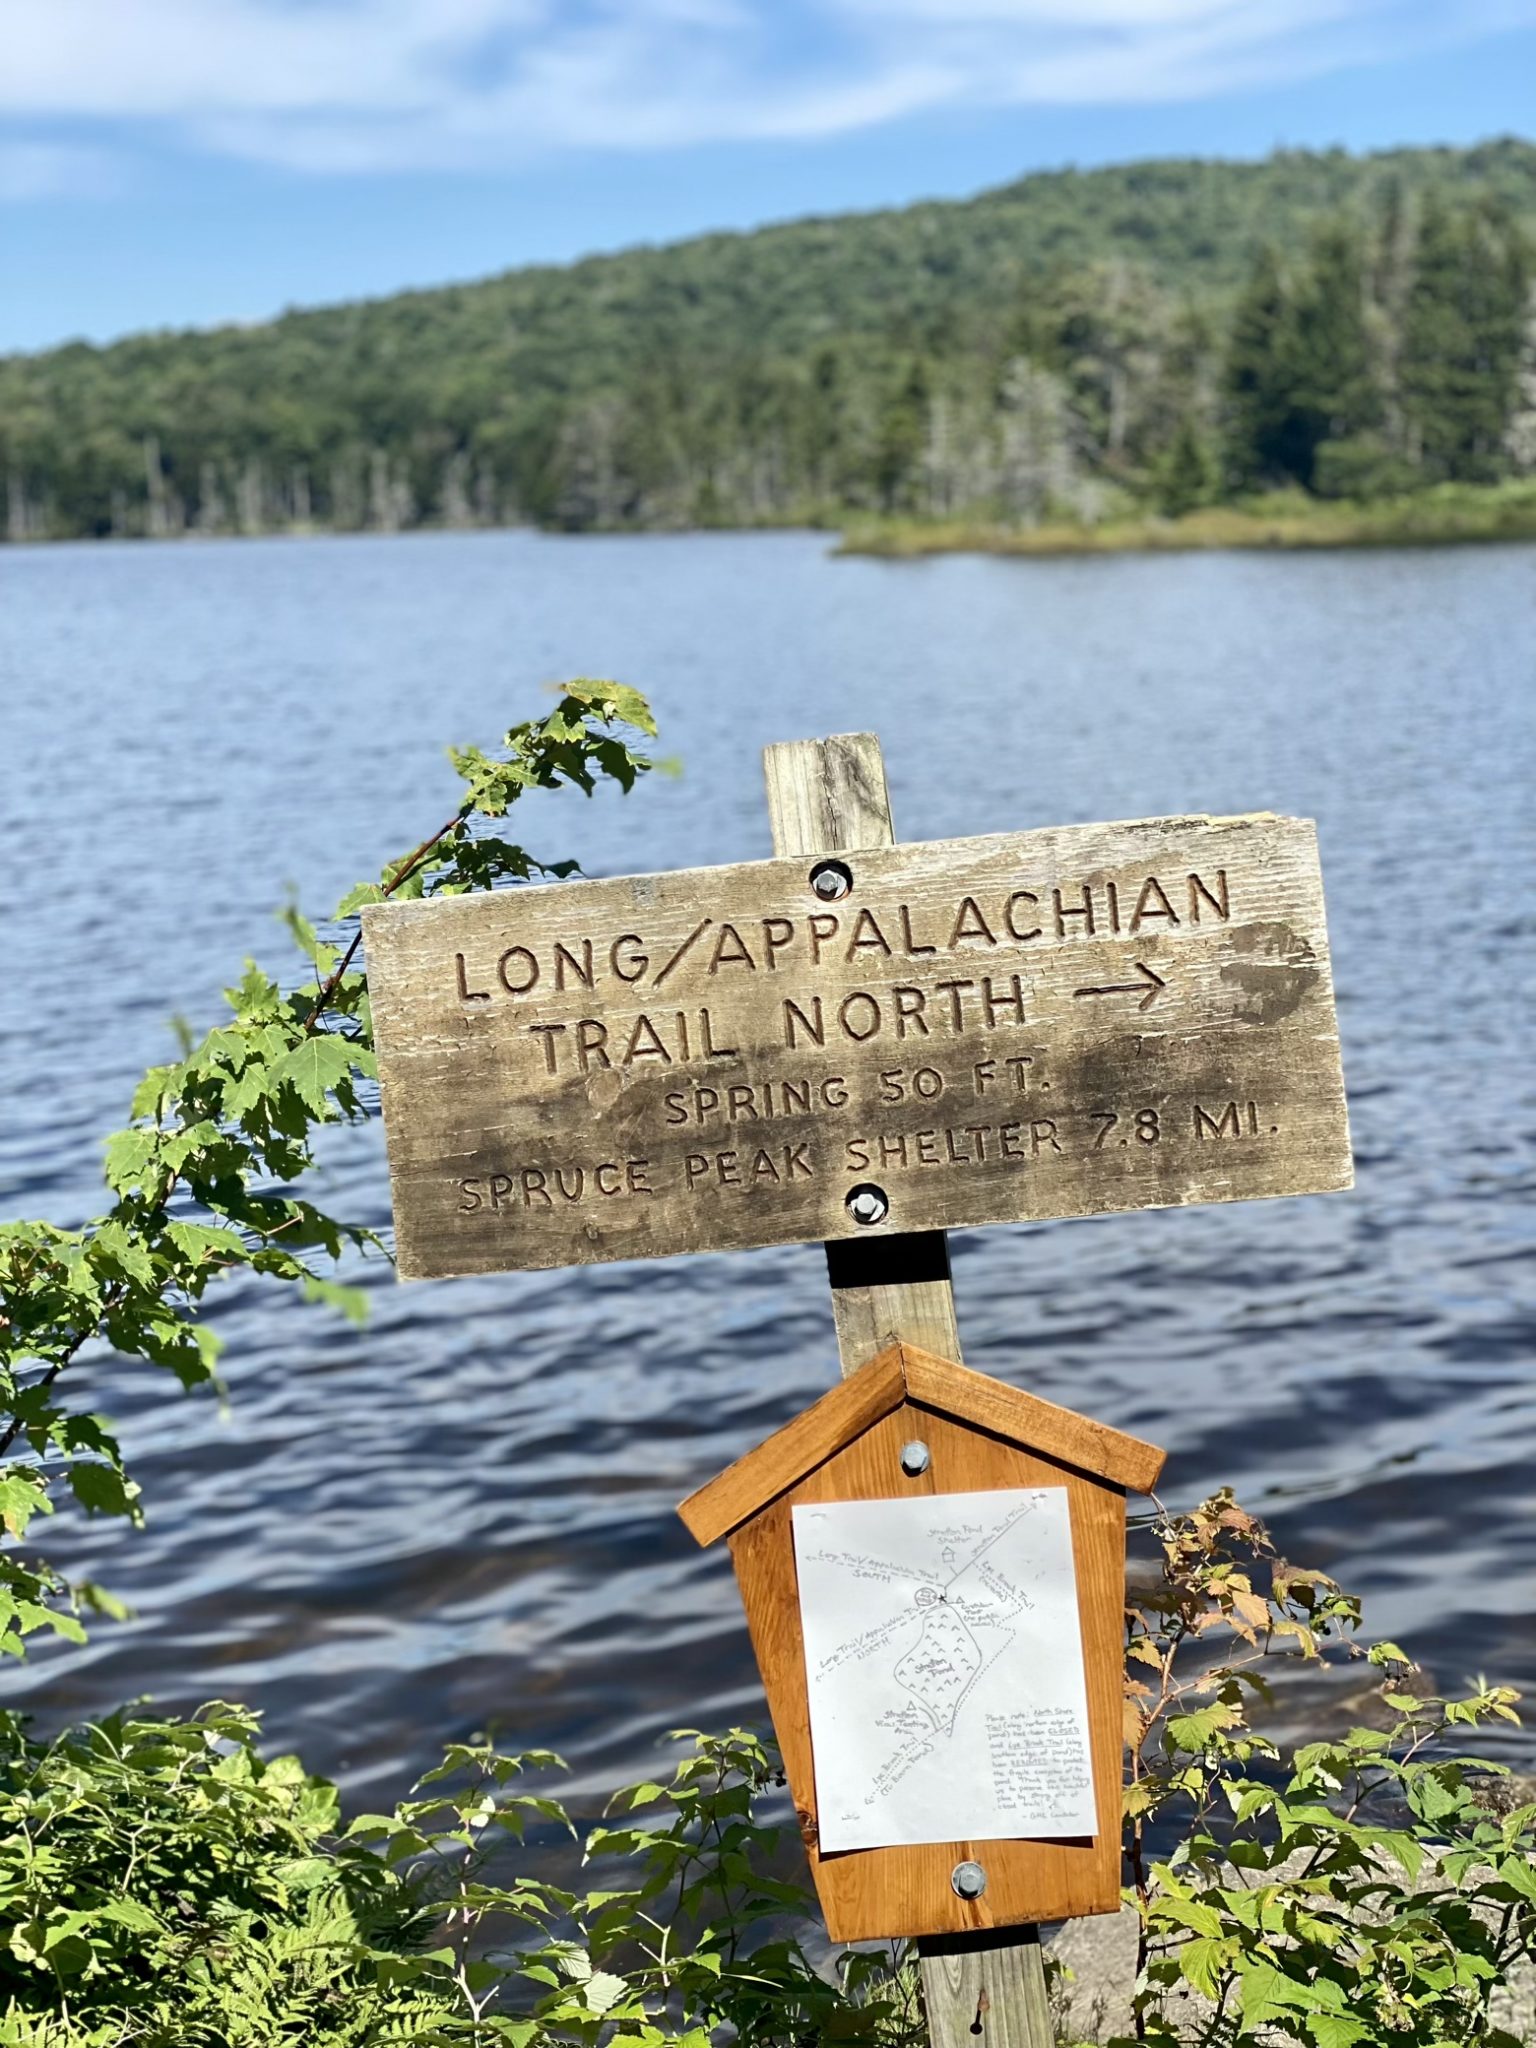 On the shore of Stratton Pond